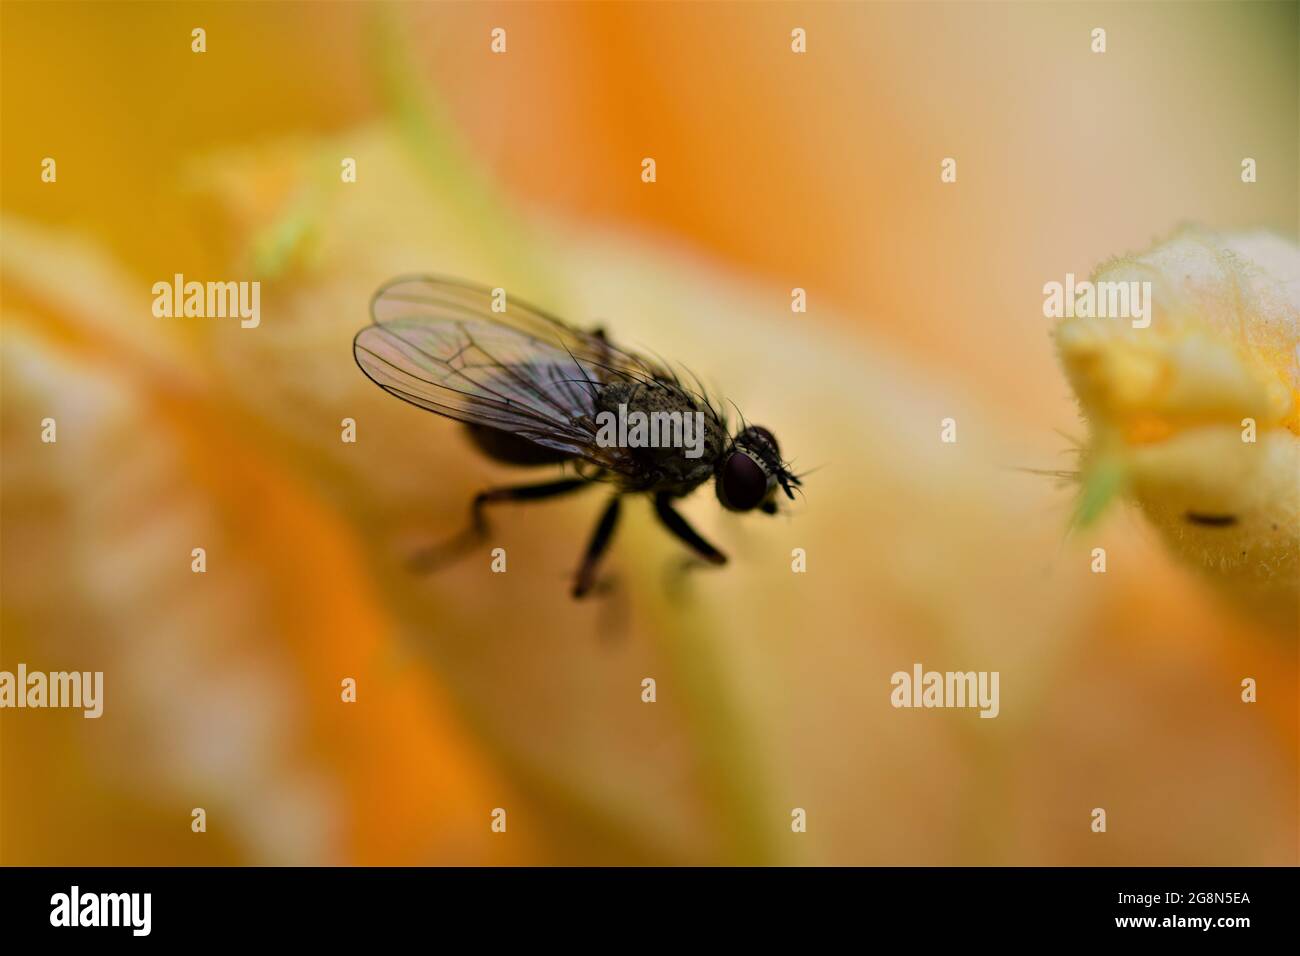 One fly sits on a yellow pumkin blossom Stock Photo